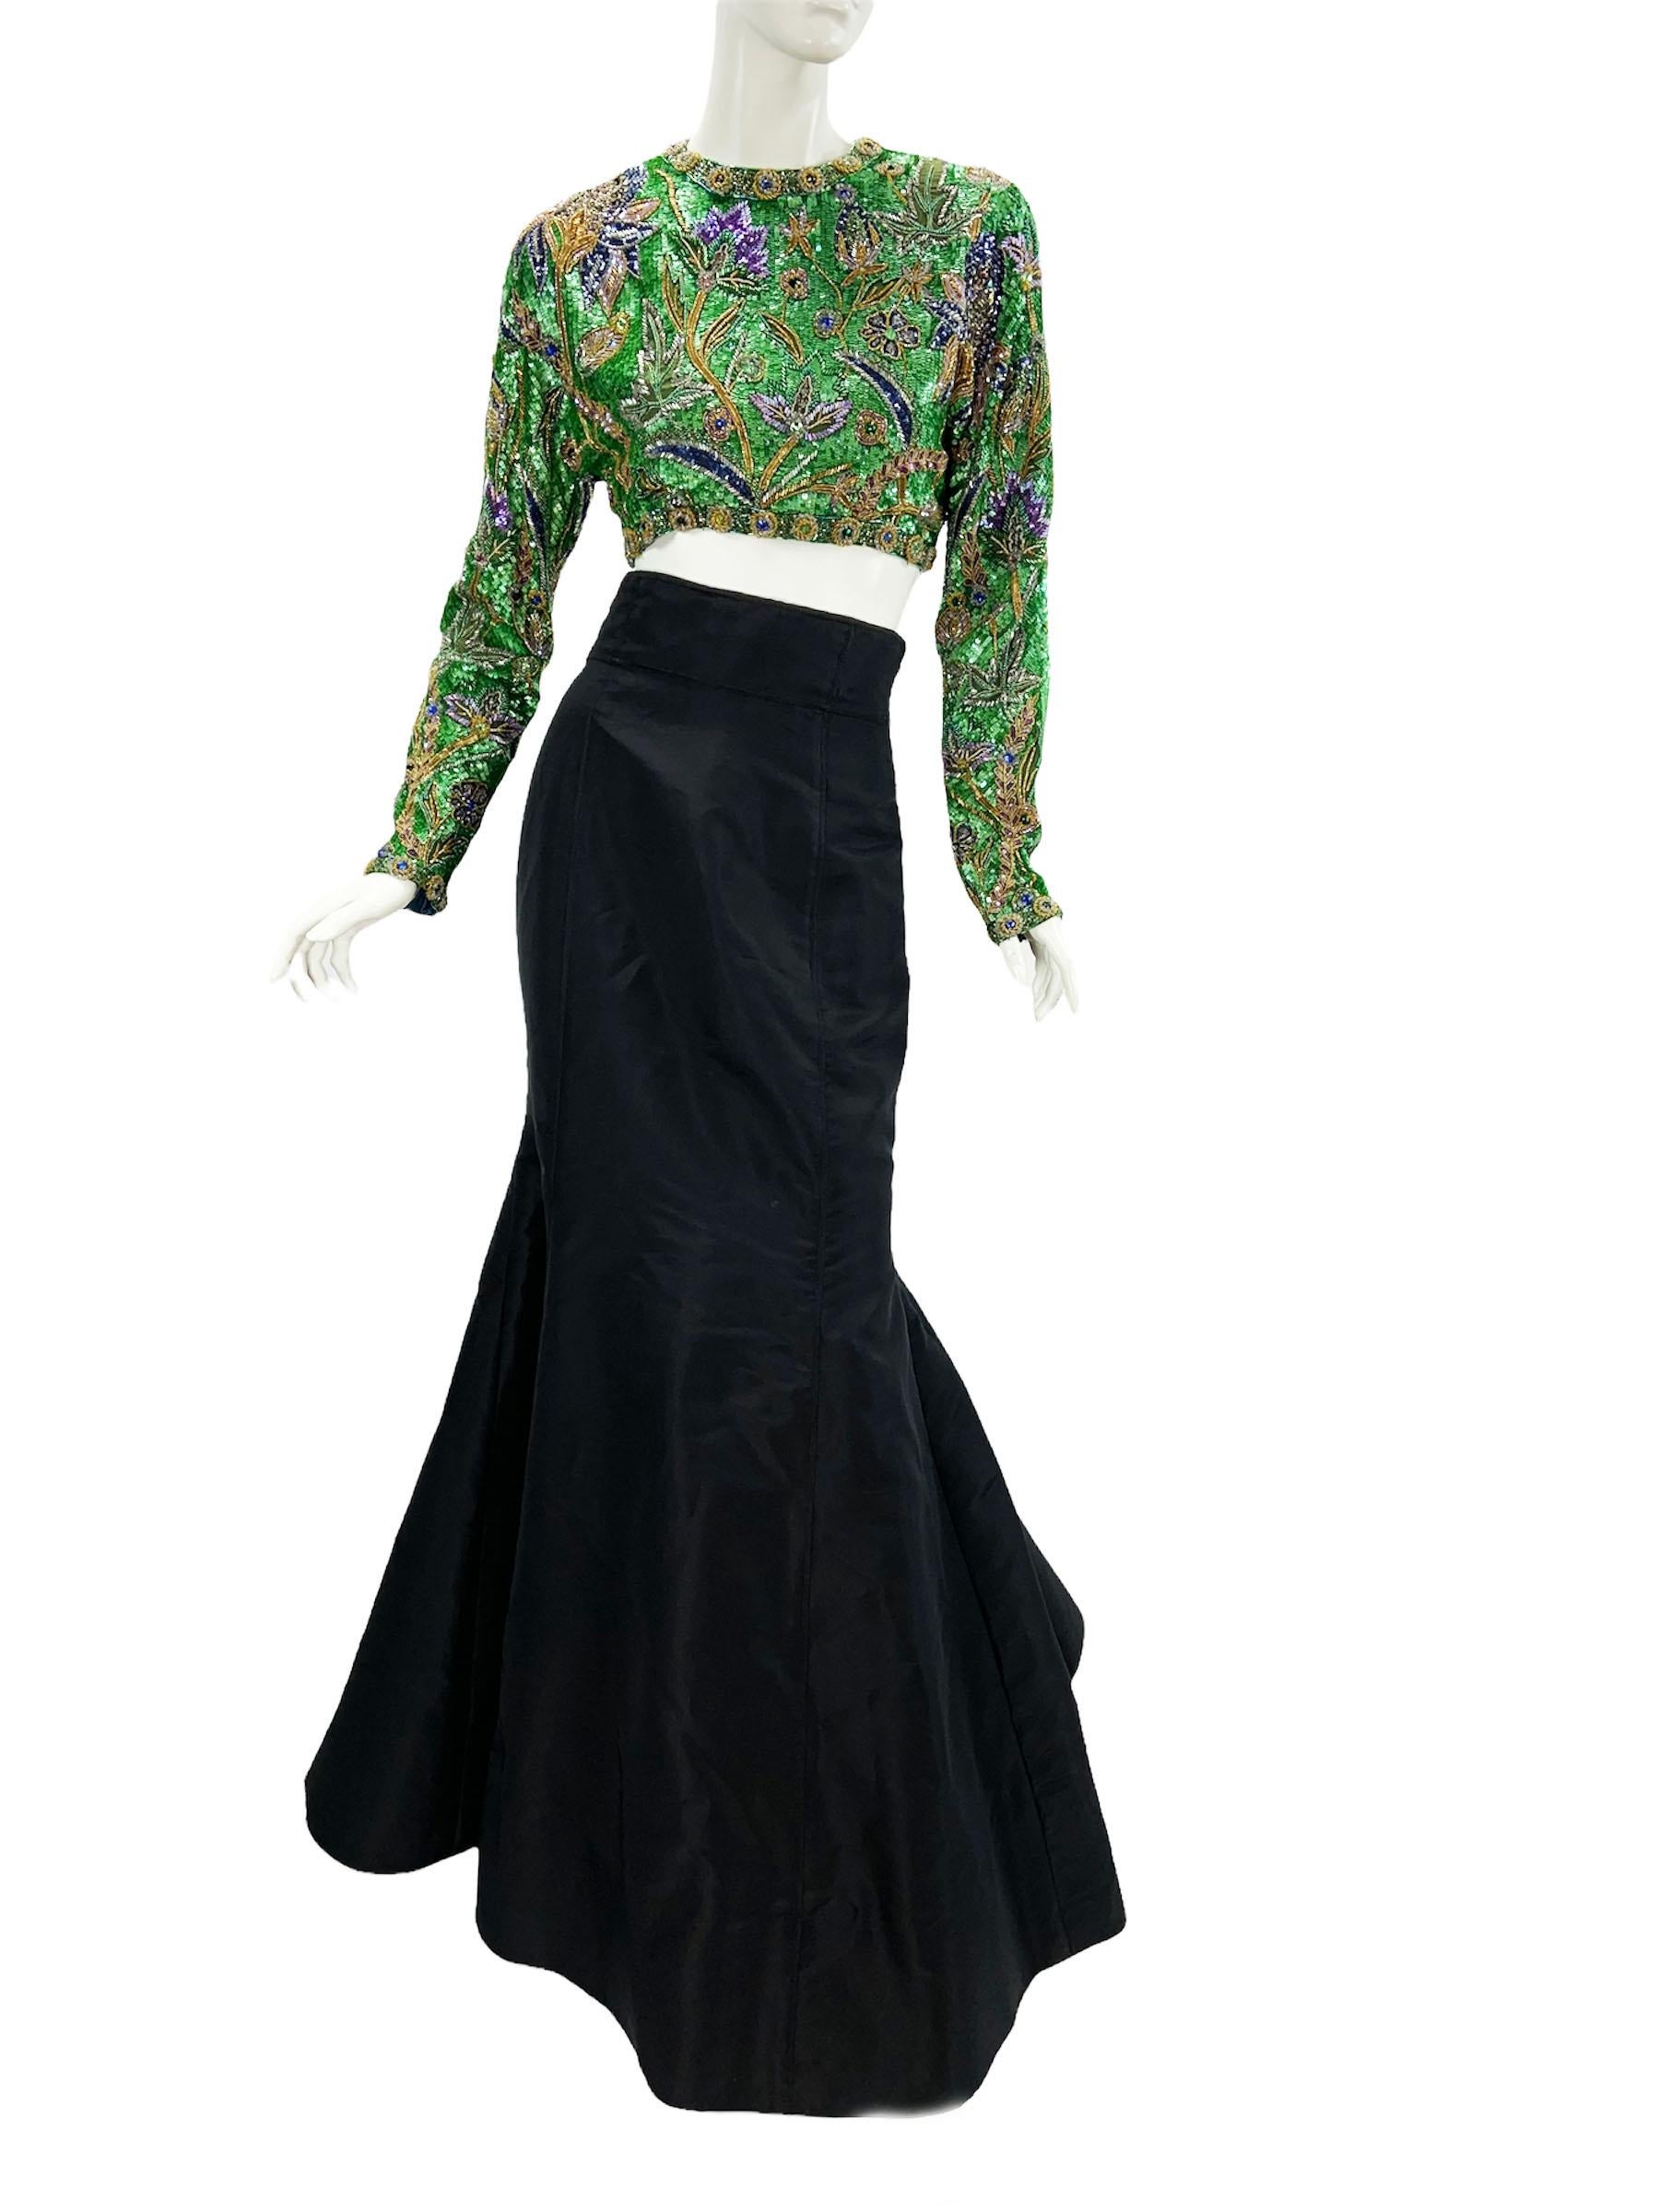 Vintage 80's Oscar De La Renta Embellished Skirt Set
Reversible Fully Exquisitely Hand Beaded and Sequined Bolero in Emerald Green Background with Purple Iris Flowers. 
Jeweled Medallions Adorn the Edging and Cuffs. Dolman Sleeves. Fully Lined. Open